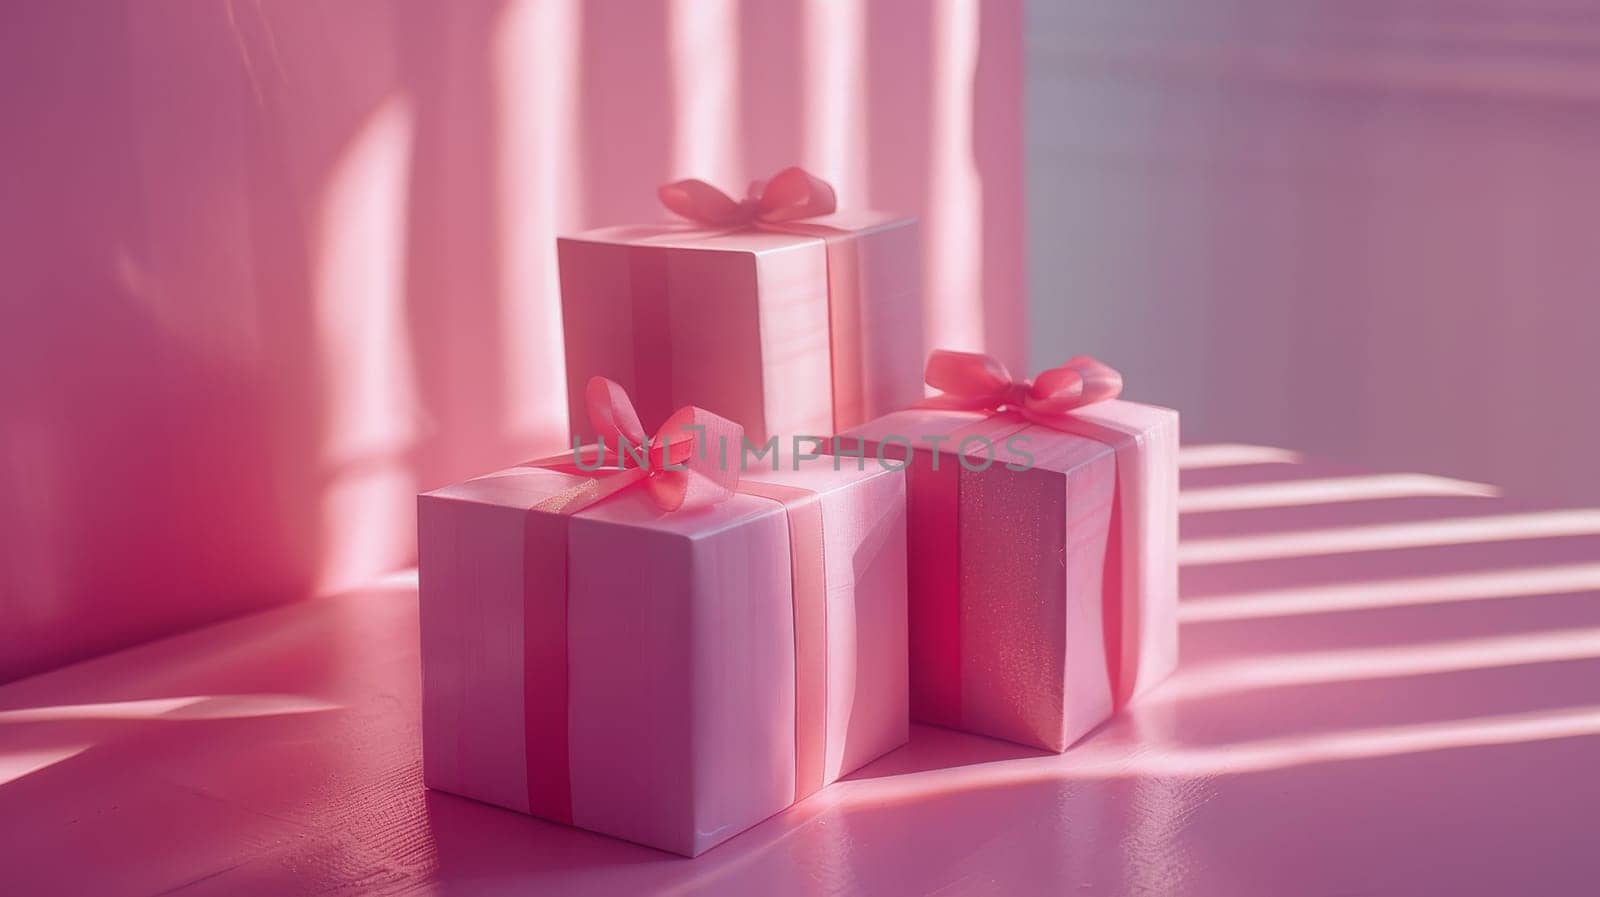 Three pink boxes with ribbons on top of a pink table. The boxes are stacked on top of each other